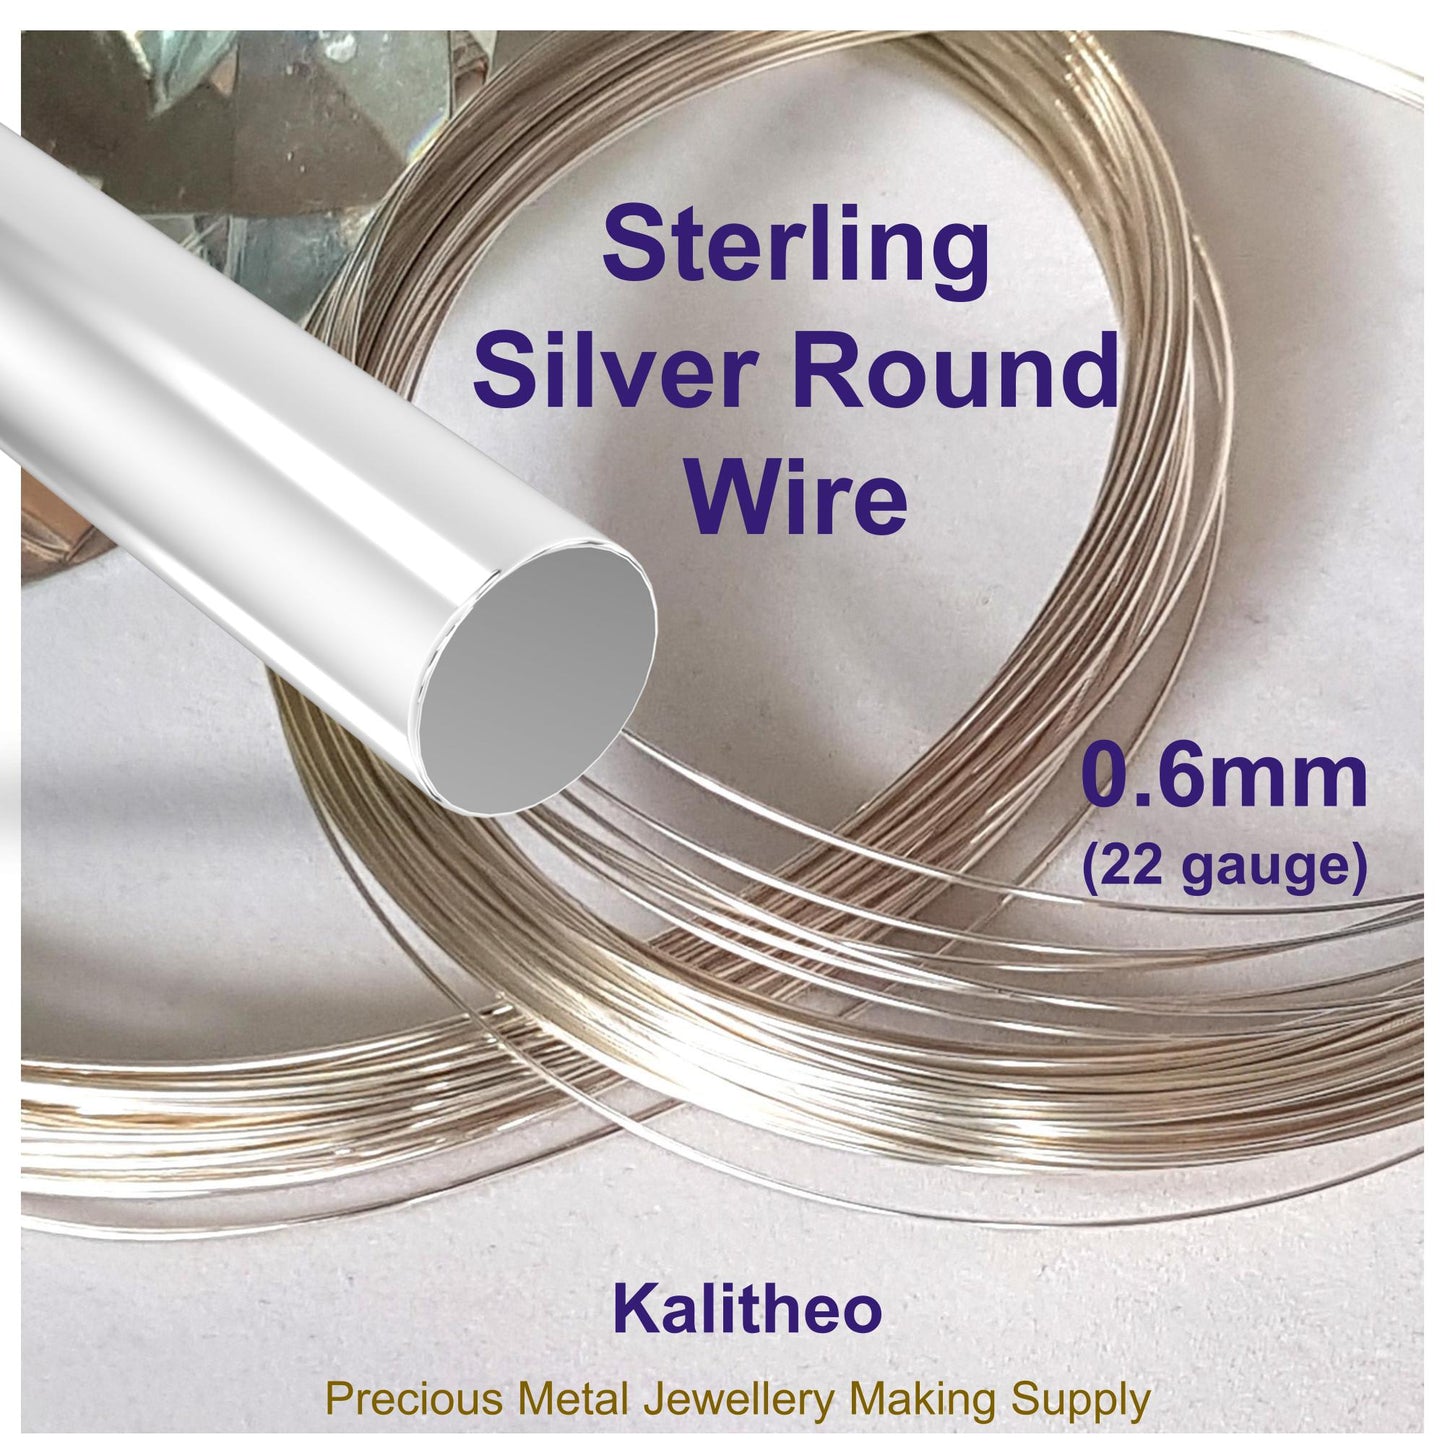 FAB Metals - 0.6mm Round Sterling Silver Wire ( 22 gauge) | Jewellery Making Supply